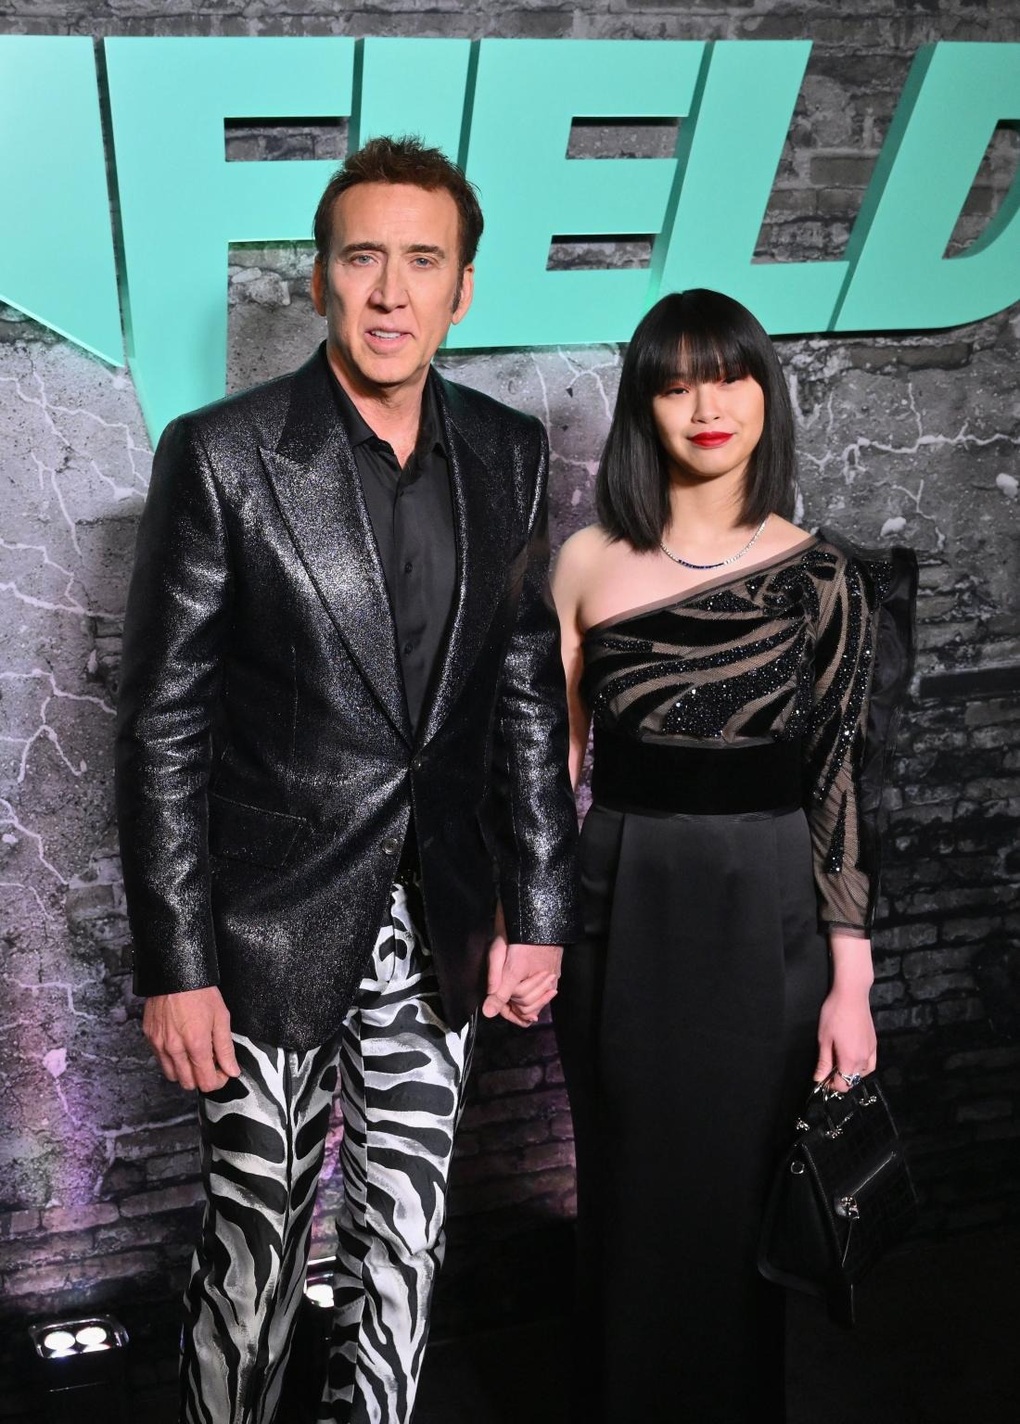 After plowing and paying off debt, Nicolas Cage happily raised his children at the age of 60 - 4